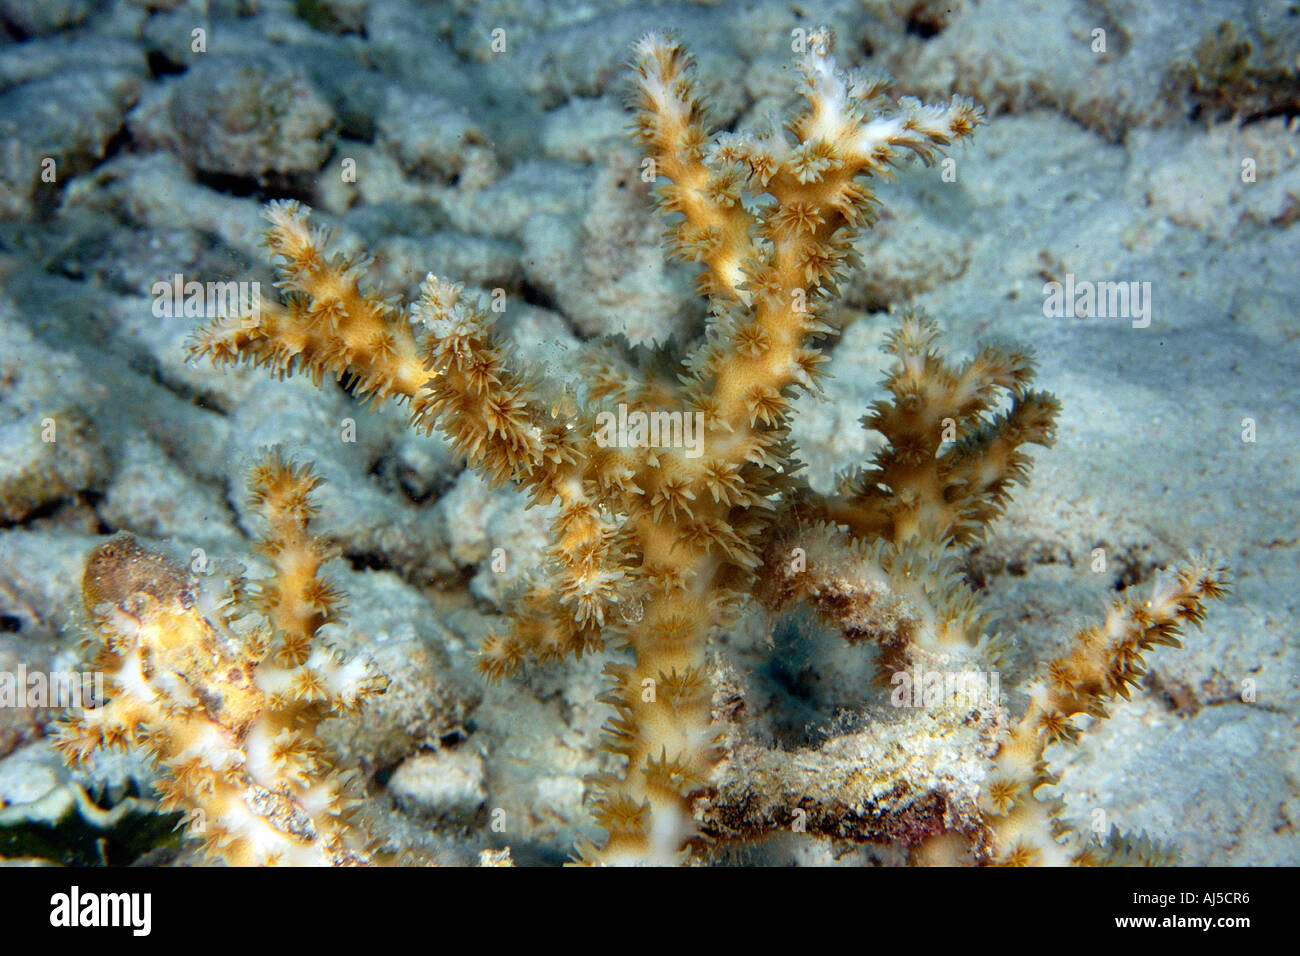 Coral Galaxea sp Ailuk atoll Marshall Islands Pacific Stock Photo